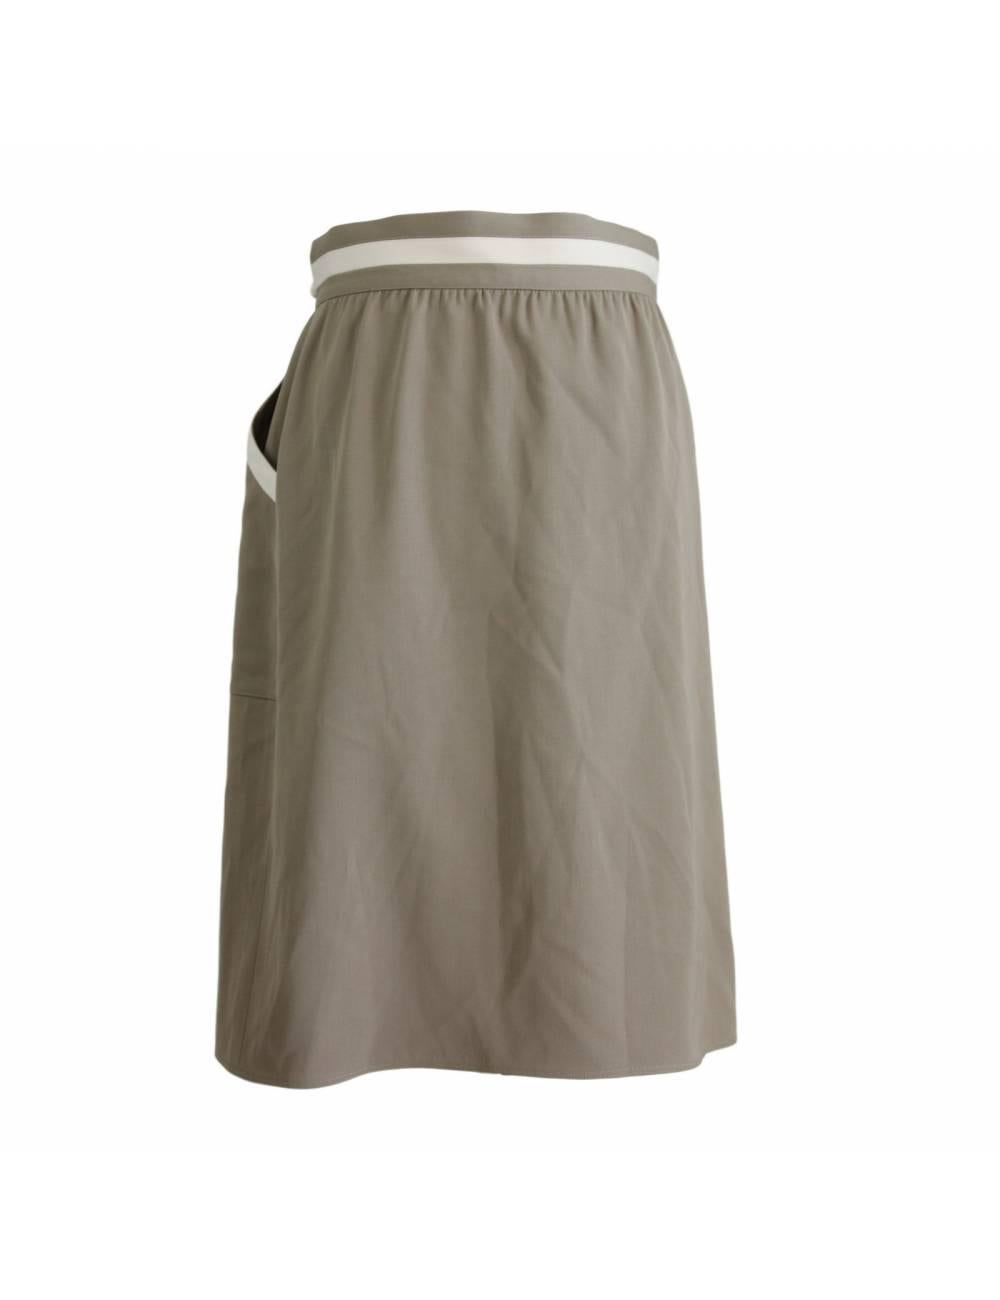 Vintage skirt French brand Les Copains, light brown, 100% wool.

The wallet skirt is knee-length, side closure, white waistband. Two pockets on the sides.

Size 38 IT 4 US 6 UK

Waist: 40 cm
Length: 70 cm